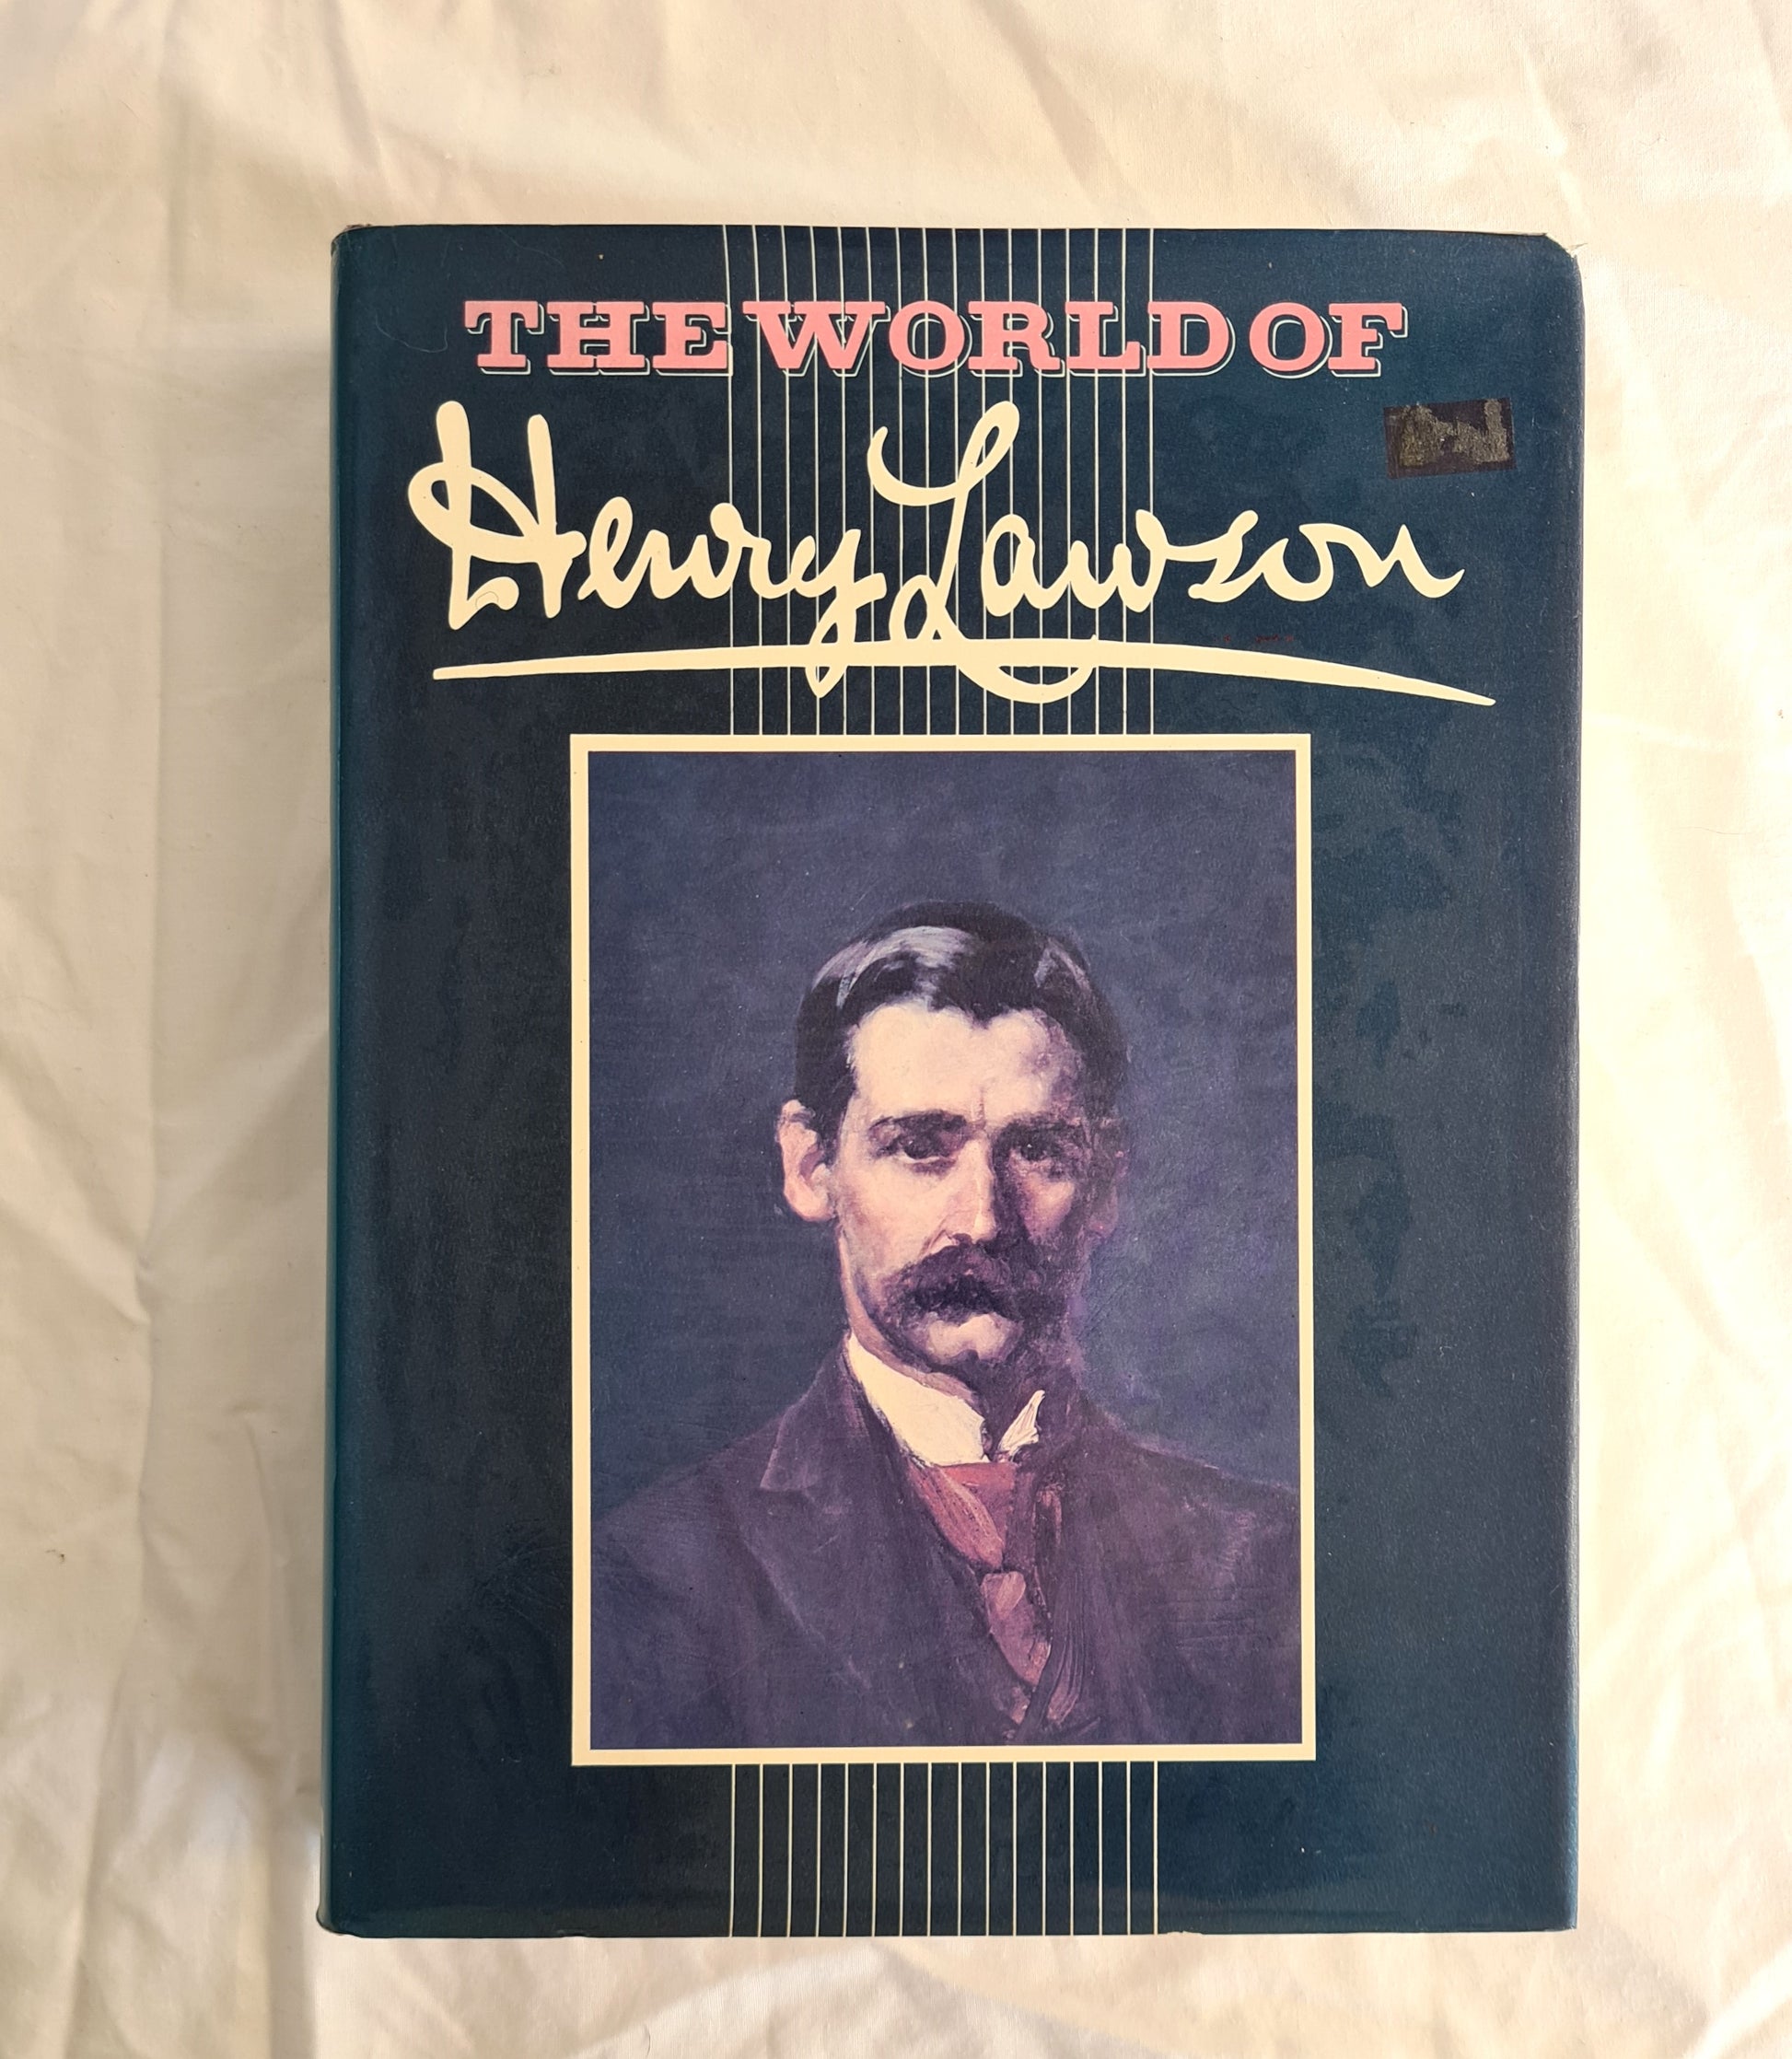 The World of Henry Lawson  Edited by Walter Stone